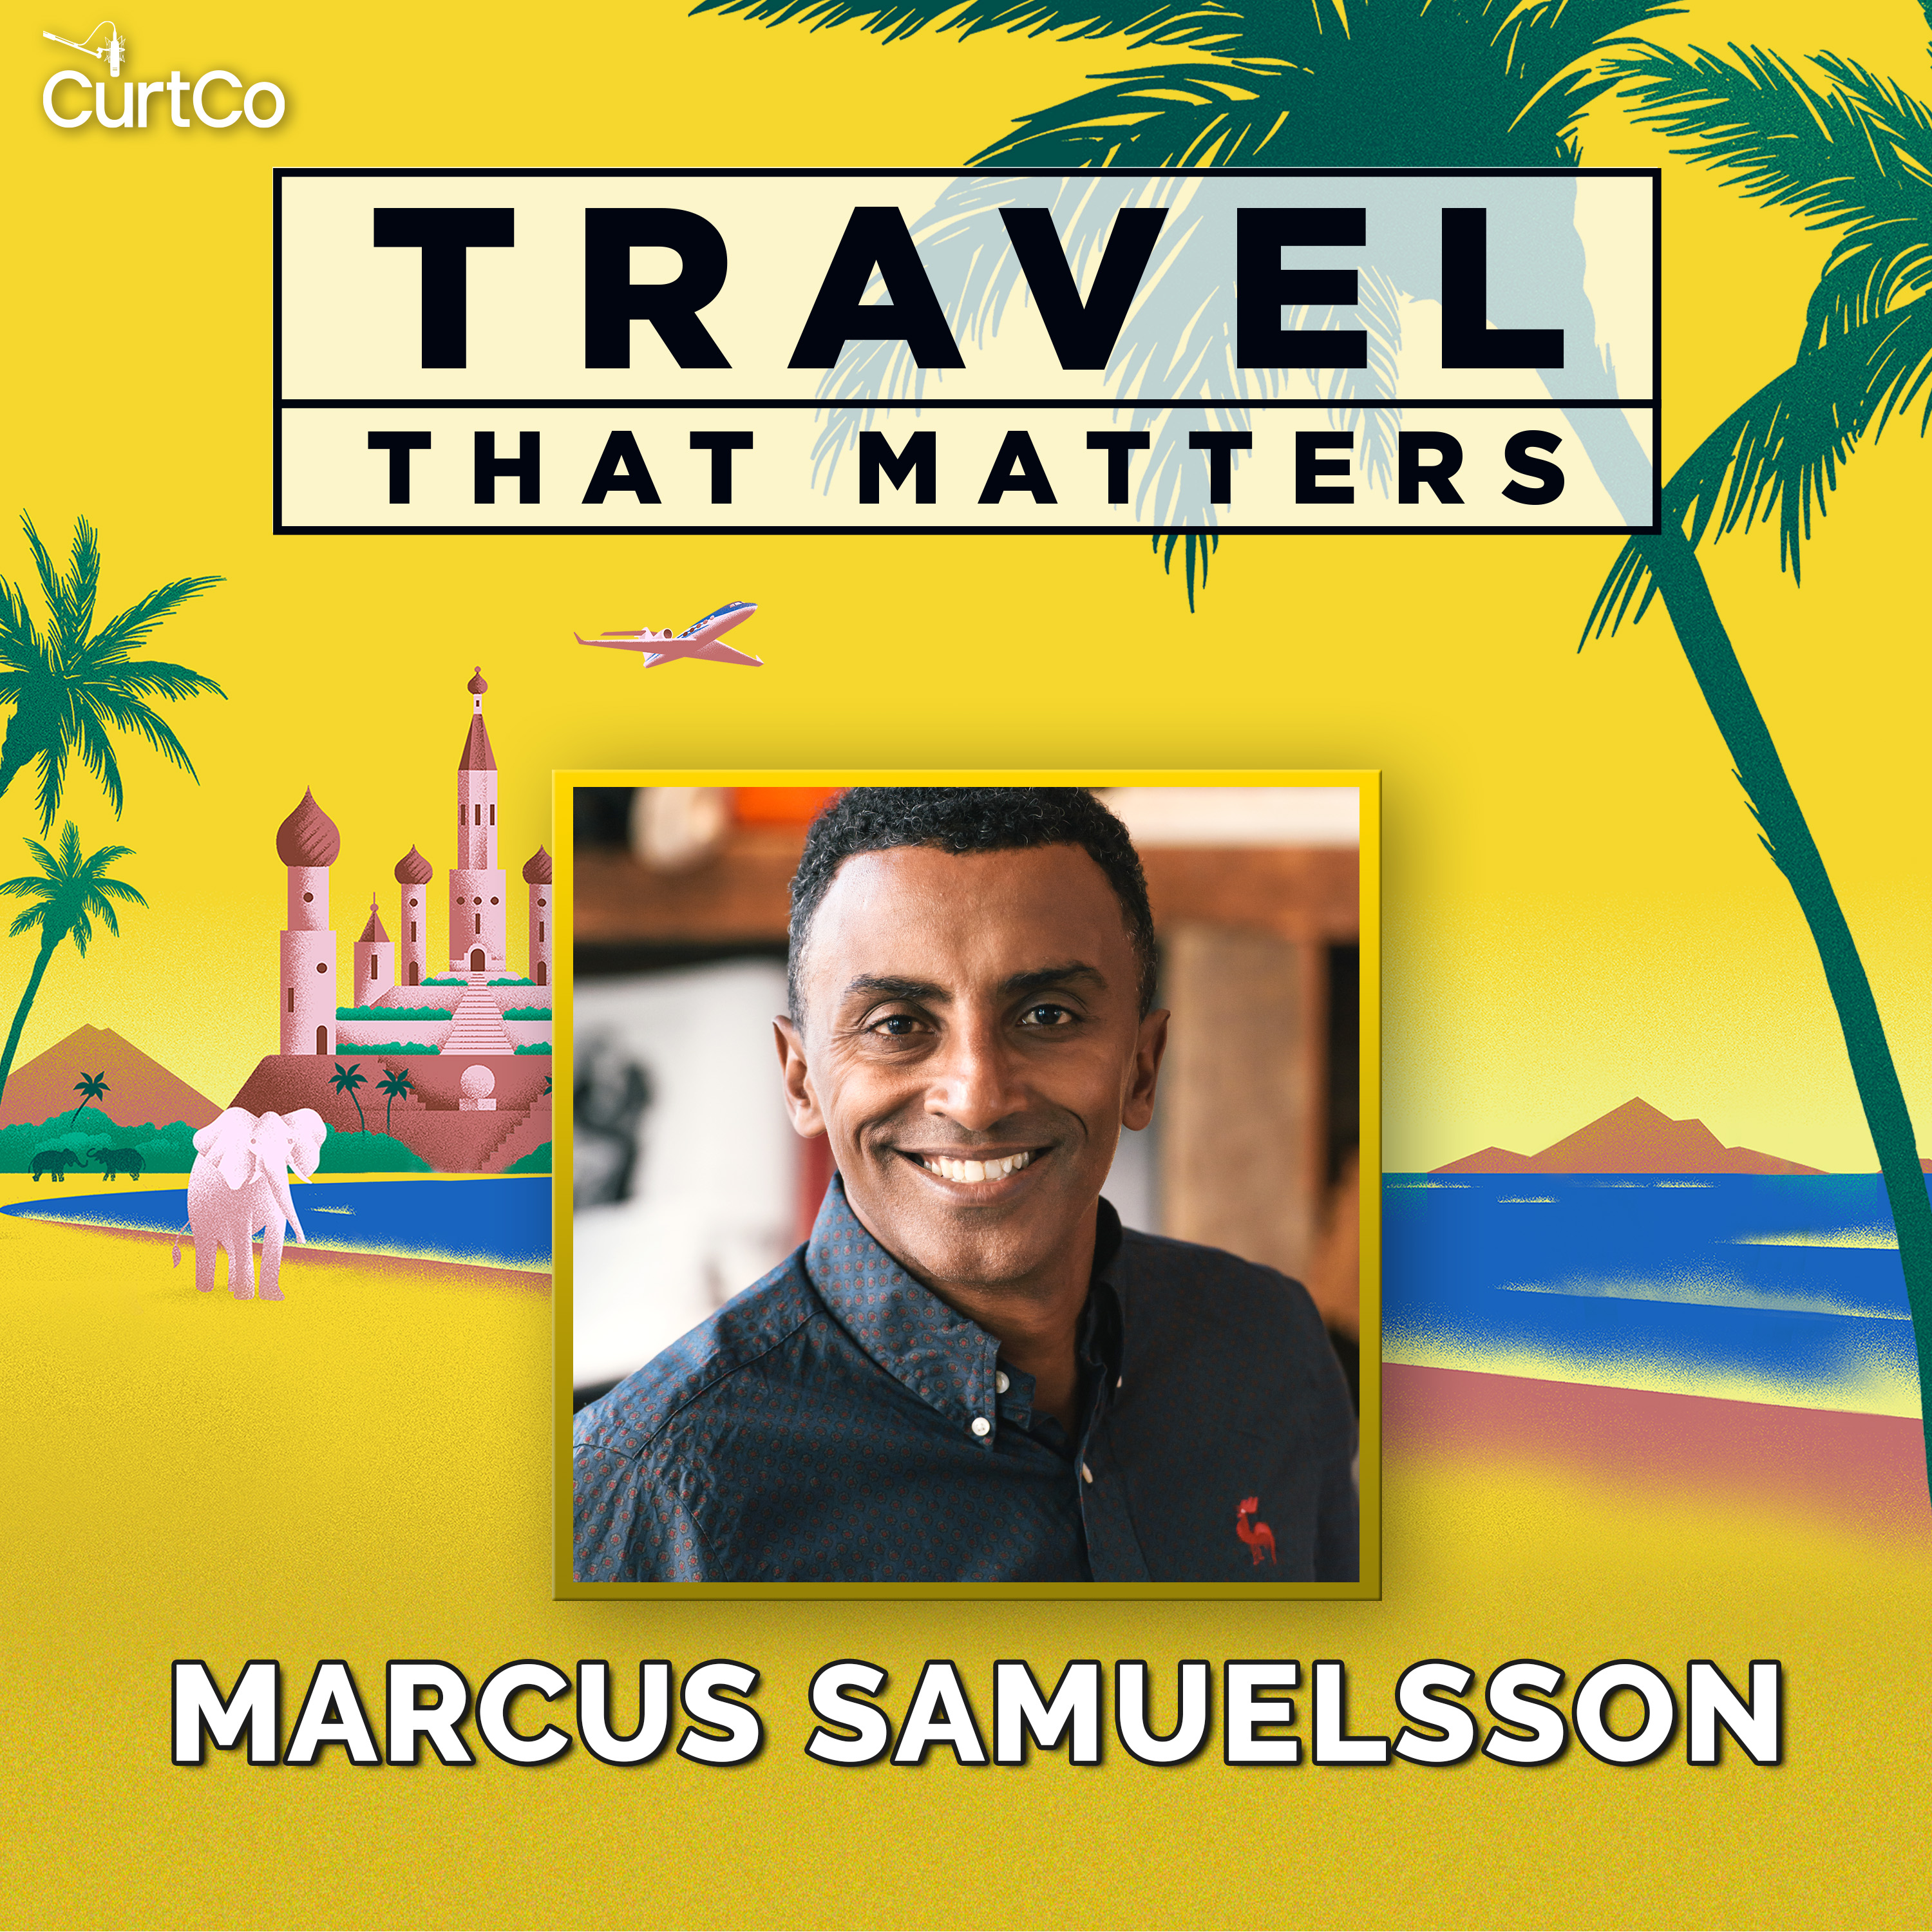 Marcus Samuelsson (Winner of Chopped and Iron Chef): Diverse Flavors of Africa, Top Culinary Destinations (Sweden), Insider Spots Across the U.S. (Los Angeles), Anthony Bourdain Memories